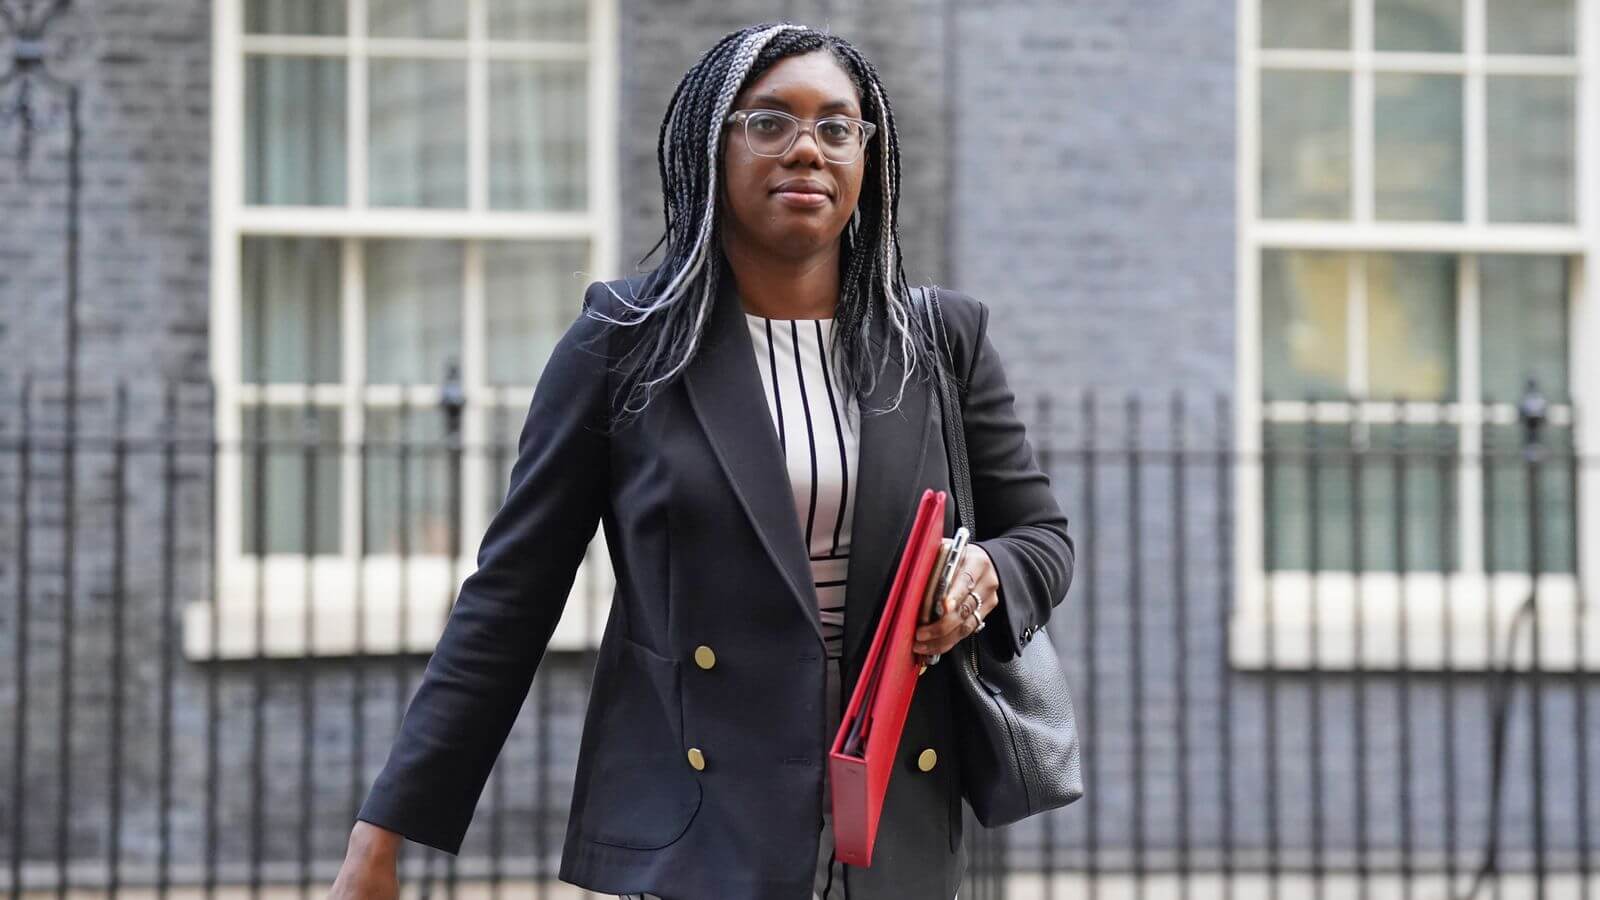 You are currently viewing ‘Who do you think you are speaking to?’: Speaker rebukes Kemi Badenoch as Tory MPs line up to criticise EU law U-turn